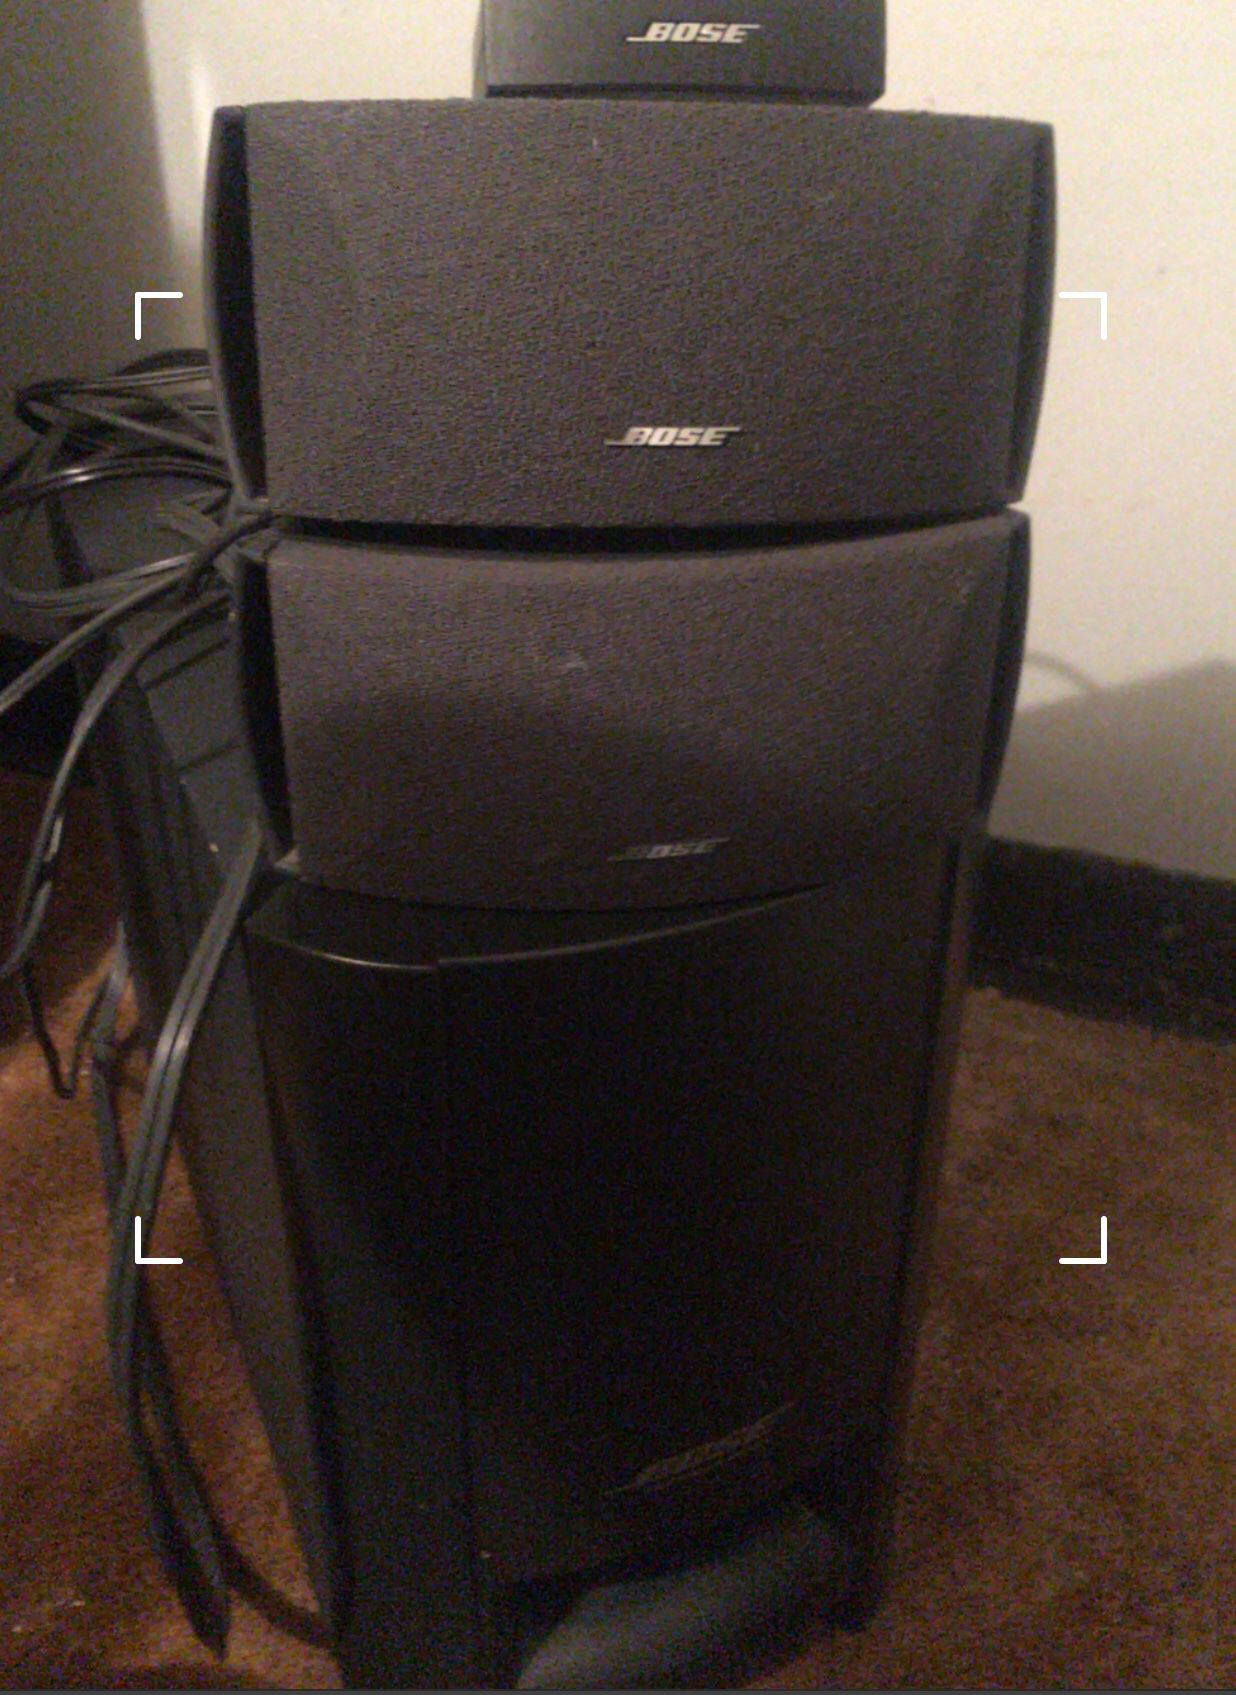 Bose sound system loud & clarity